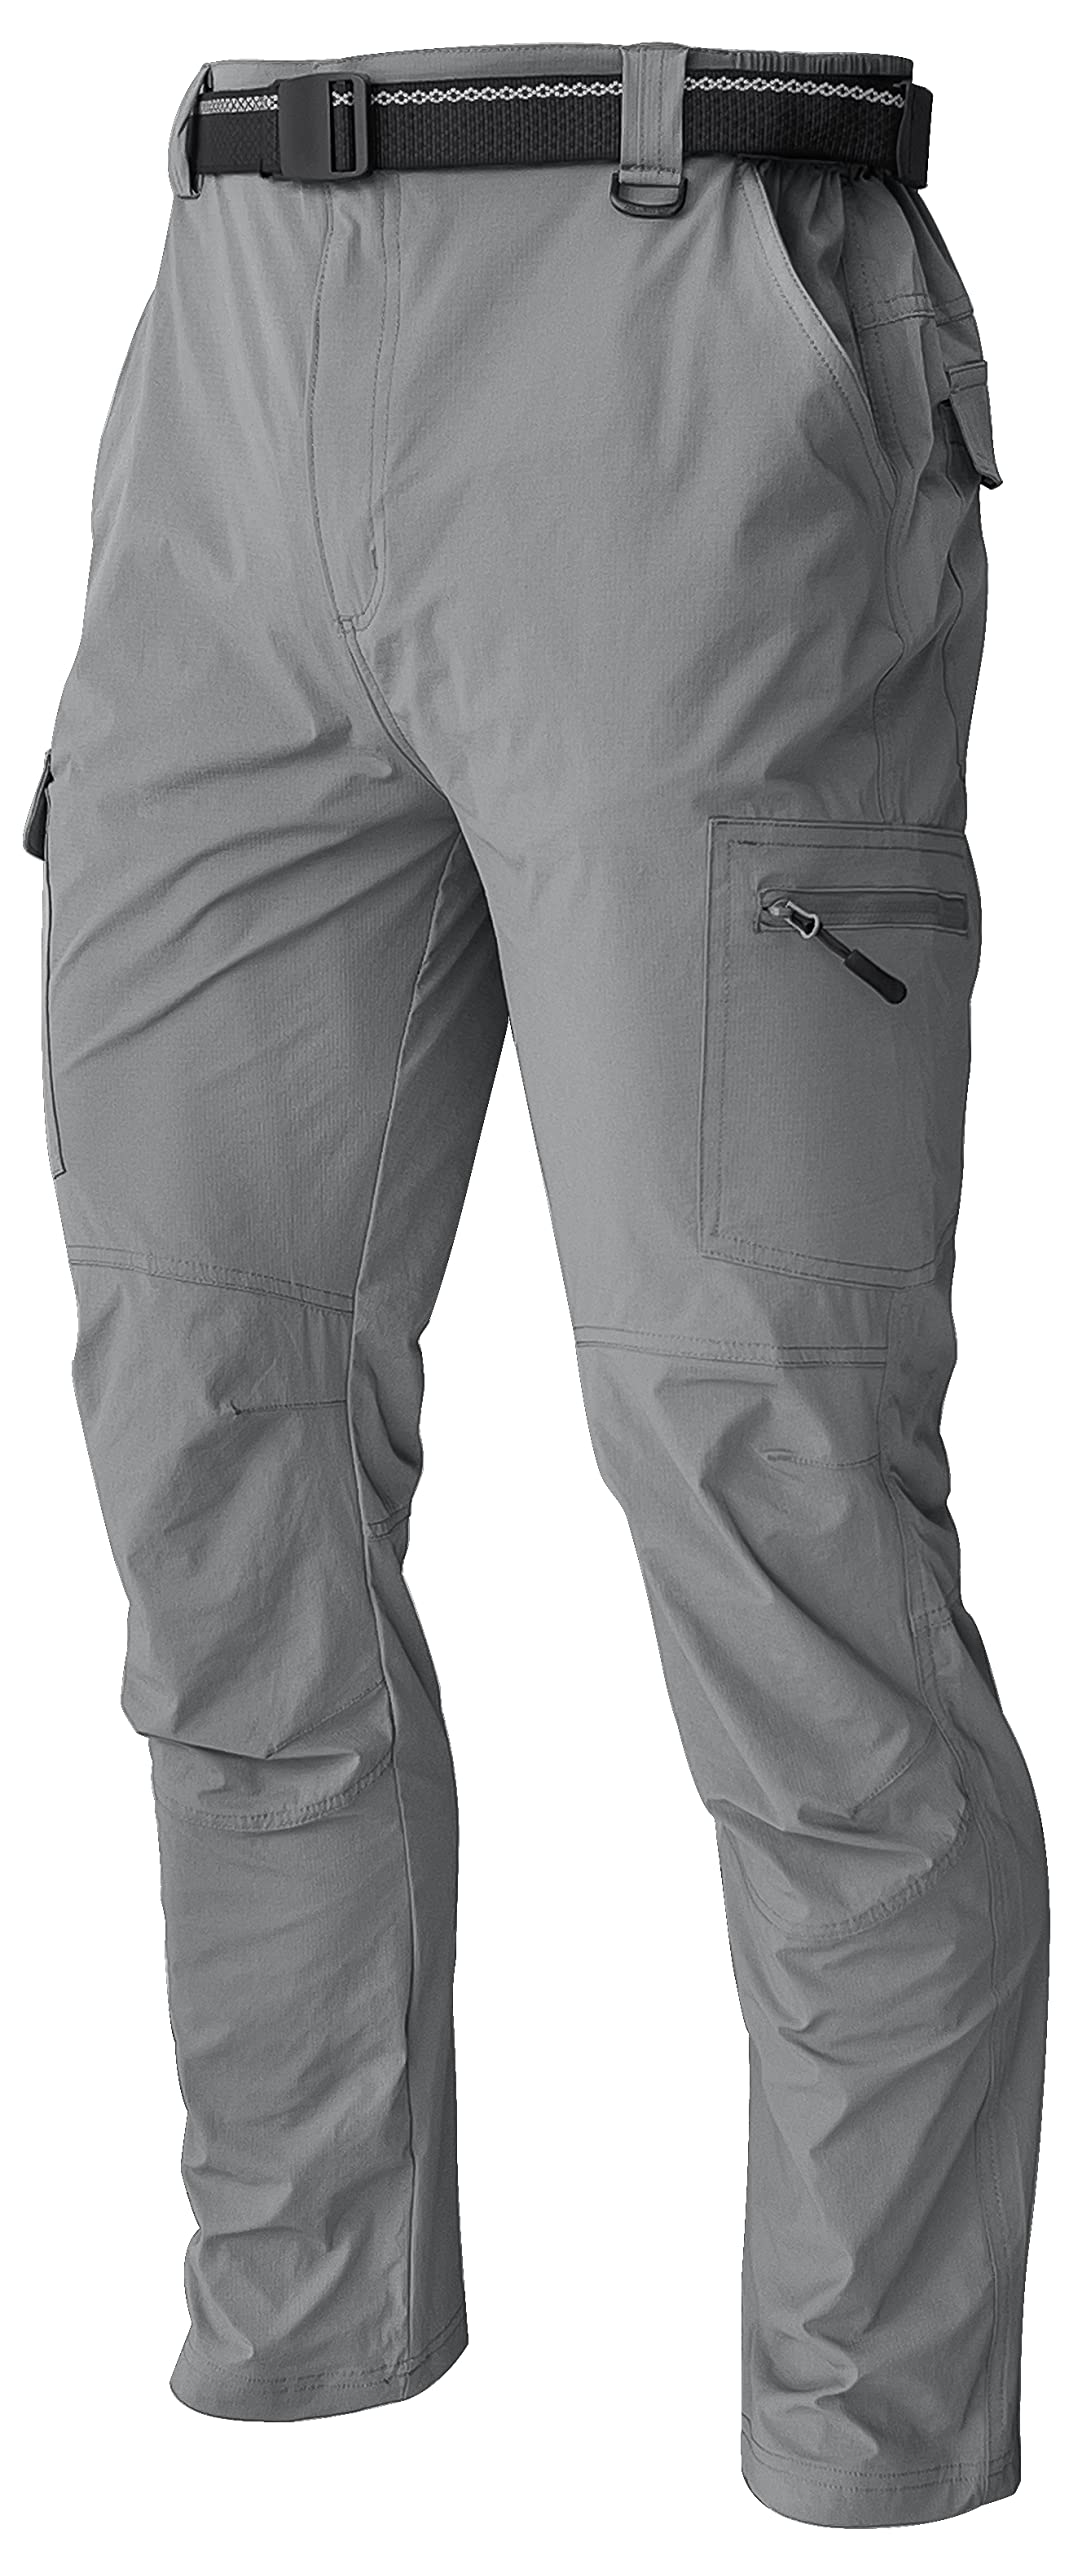 Men's Cargo Work Hiking Pants Lightweight Water Resistant Quick Dry Fishing  Travel Camping Outdoor Breathable Multi